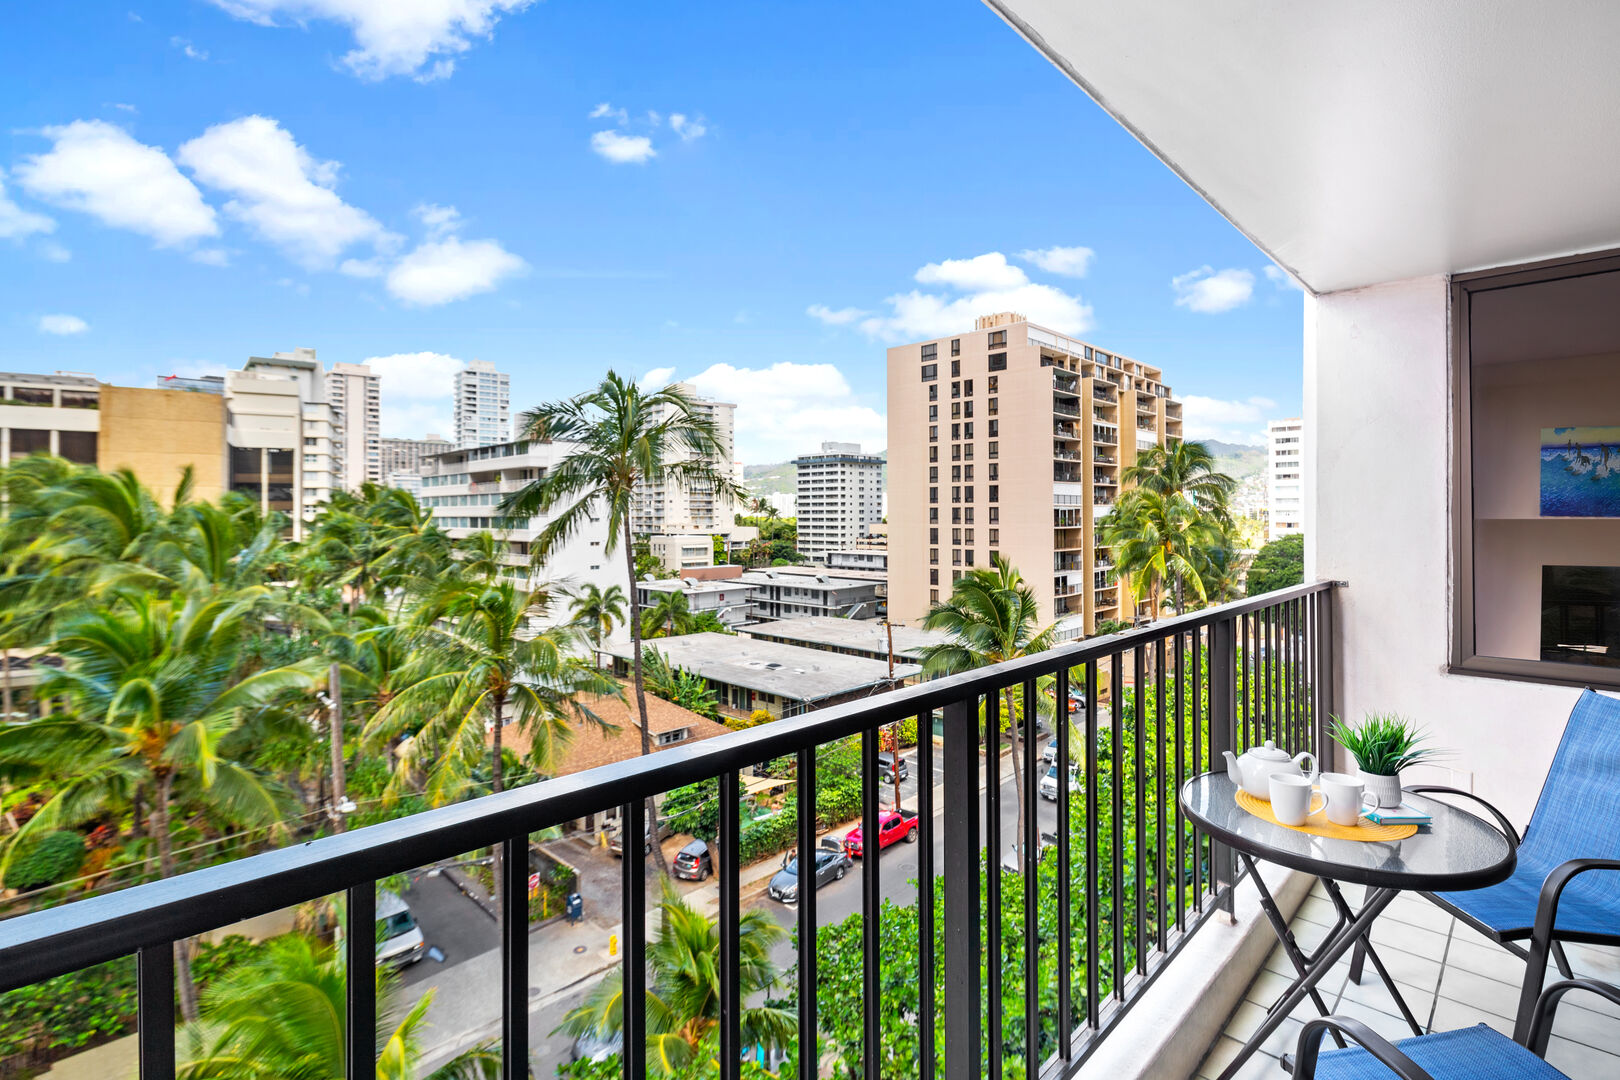 Enjoy your morning coffee on your own private lanai while looking at the beautiful view!